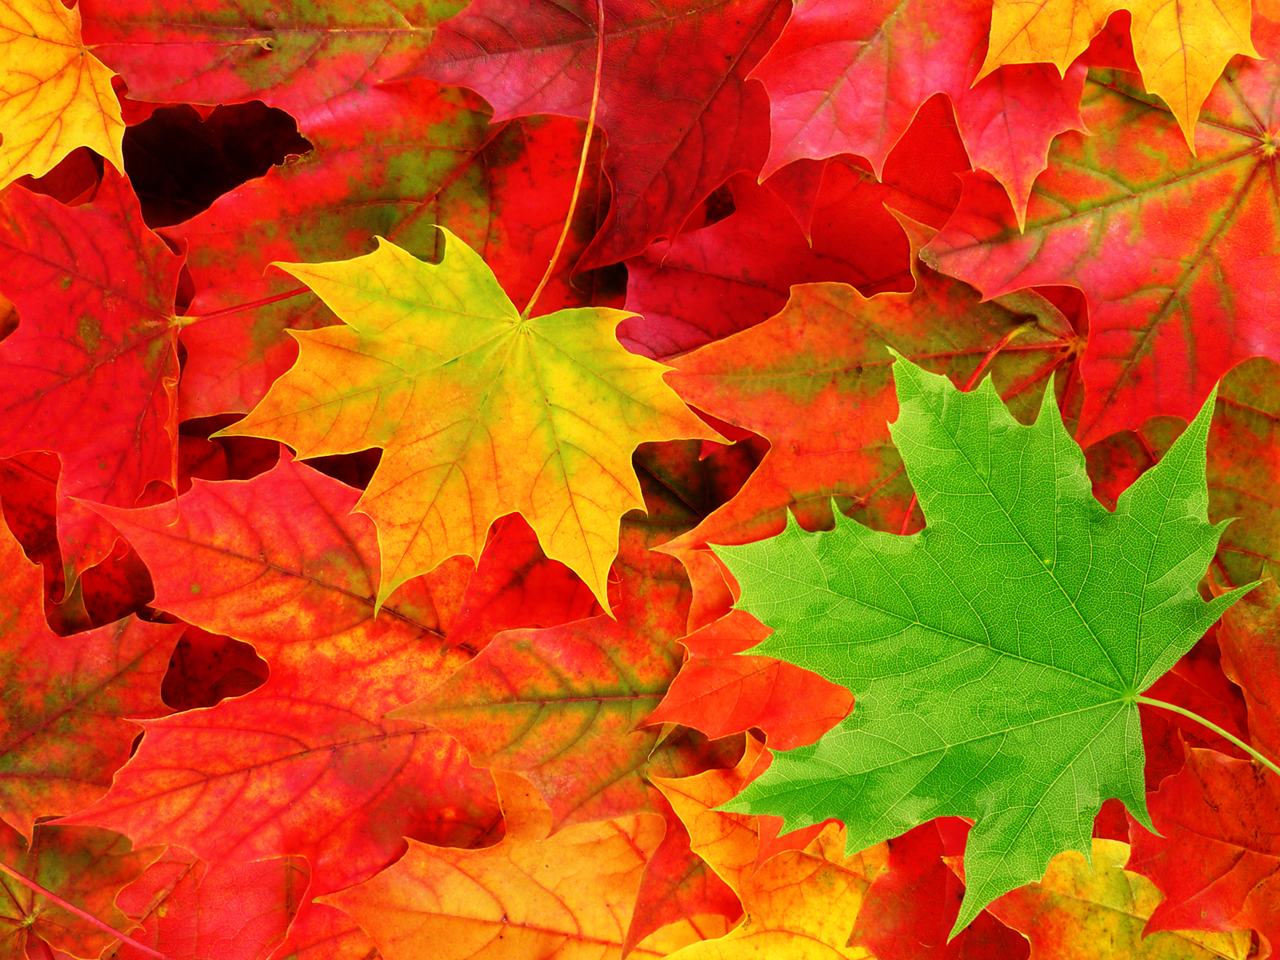 Autumn Leaves Wallpaper. HD Background Image. Photo